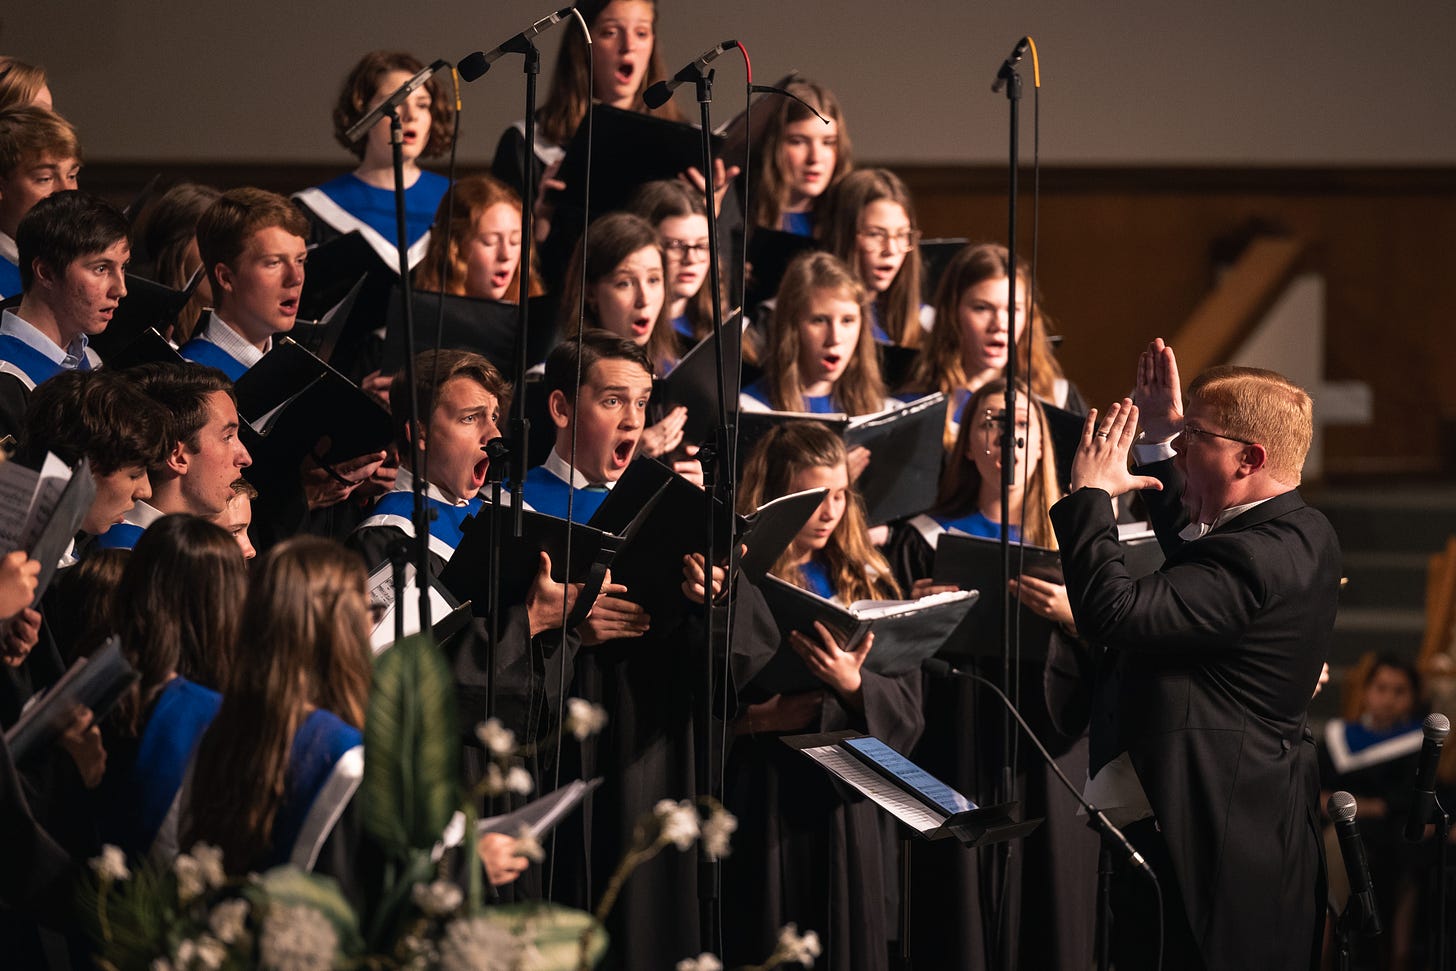 The Delta Youth Chorale in Spring 2022